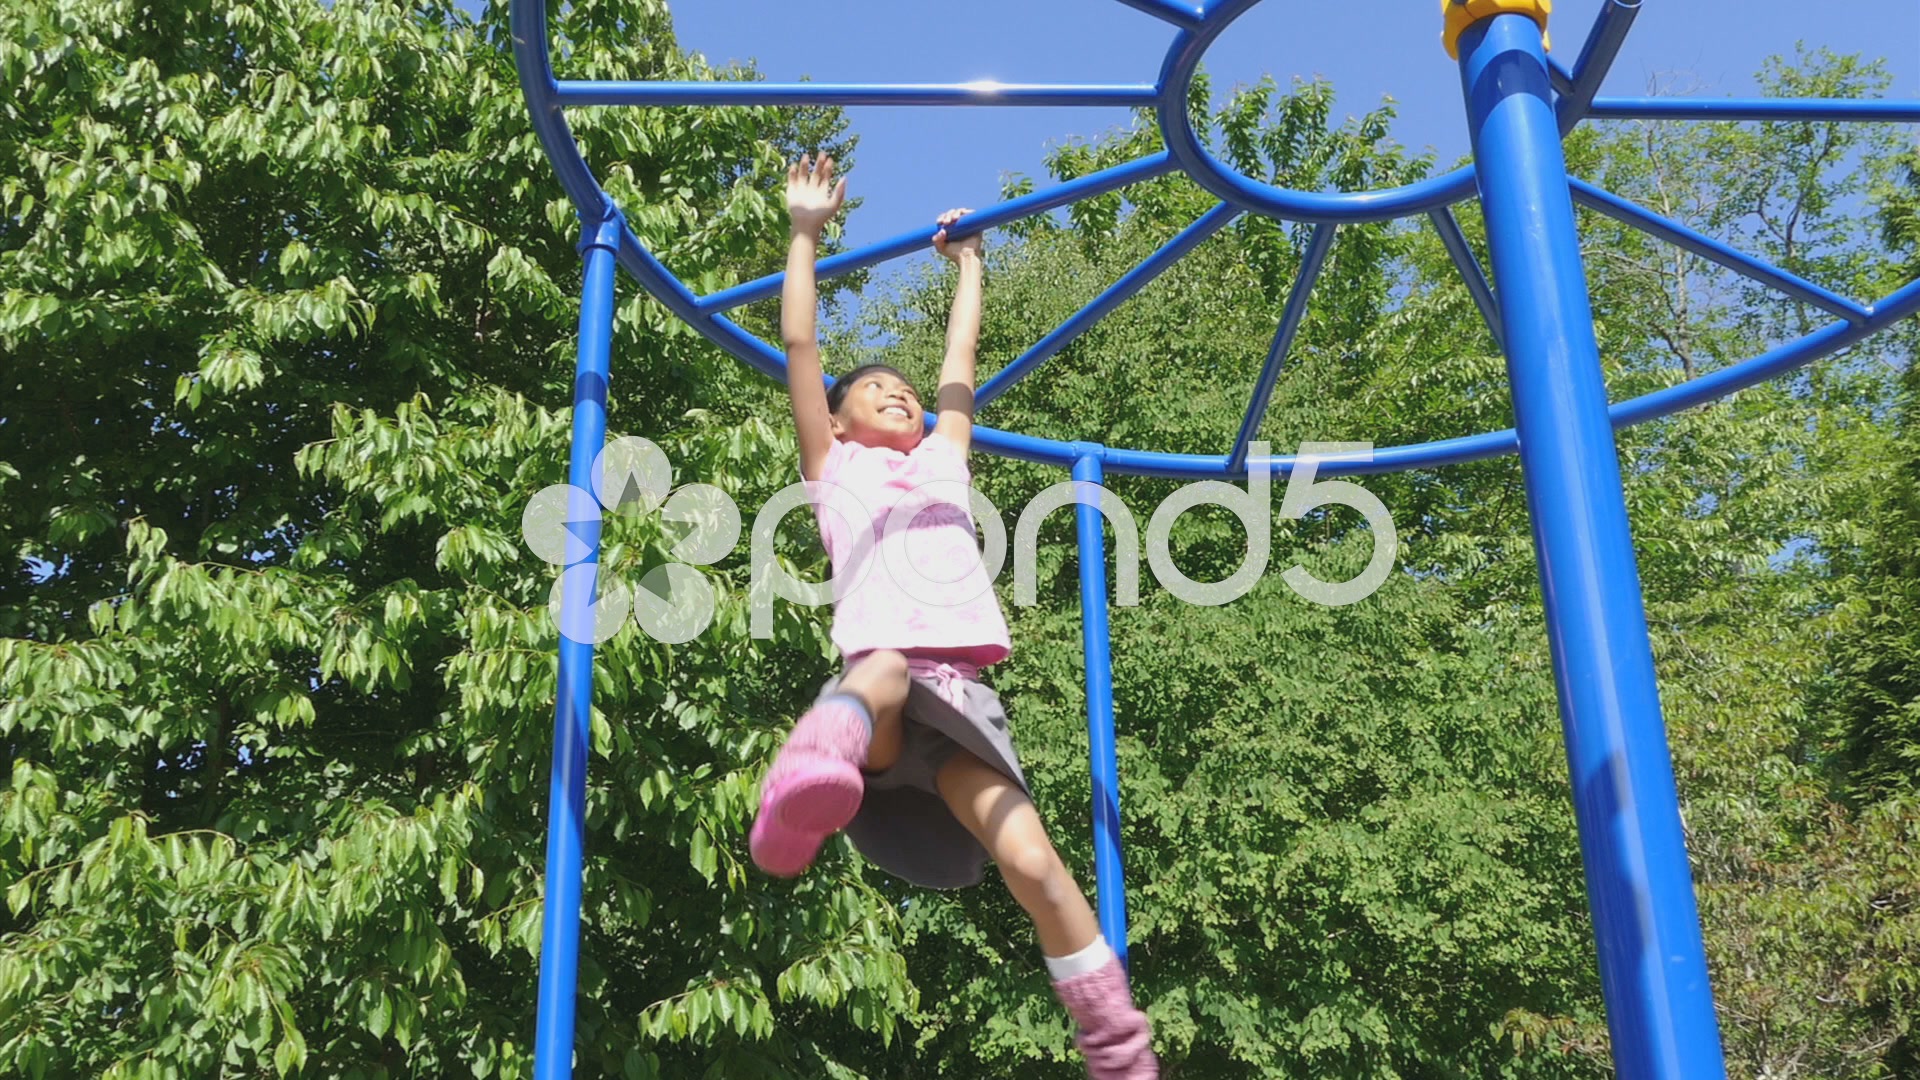 Brave Little Girl Tackling The Monkey Bars At Playground.